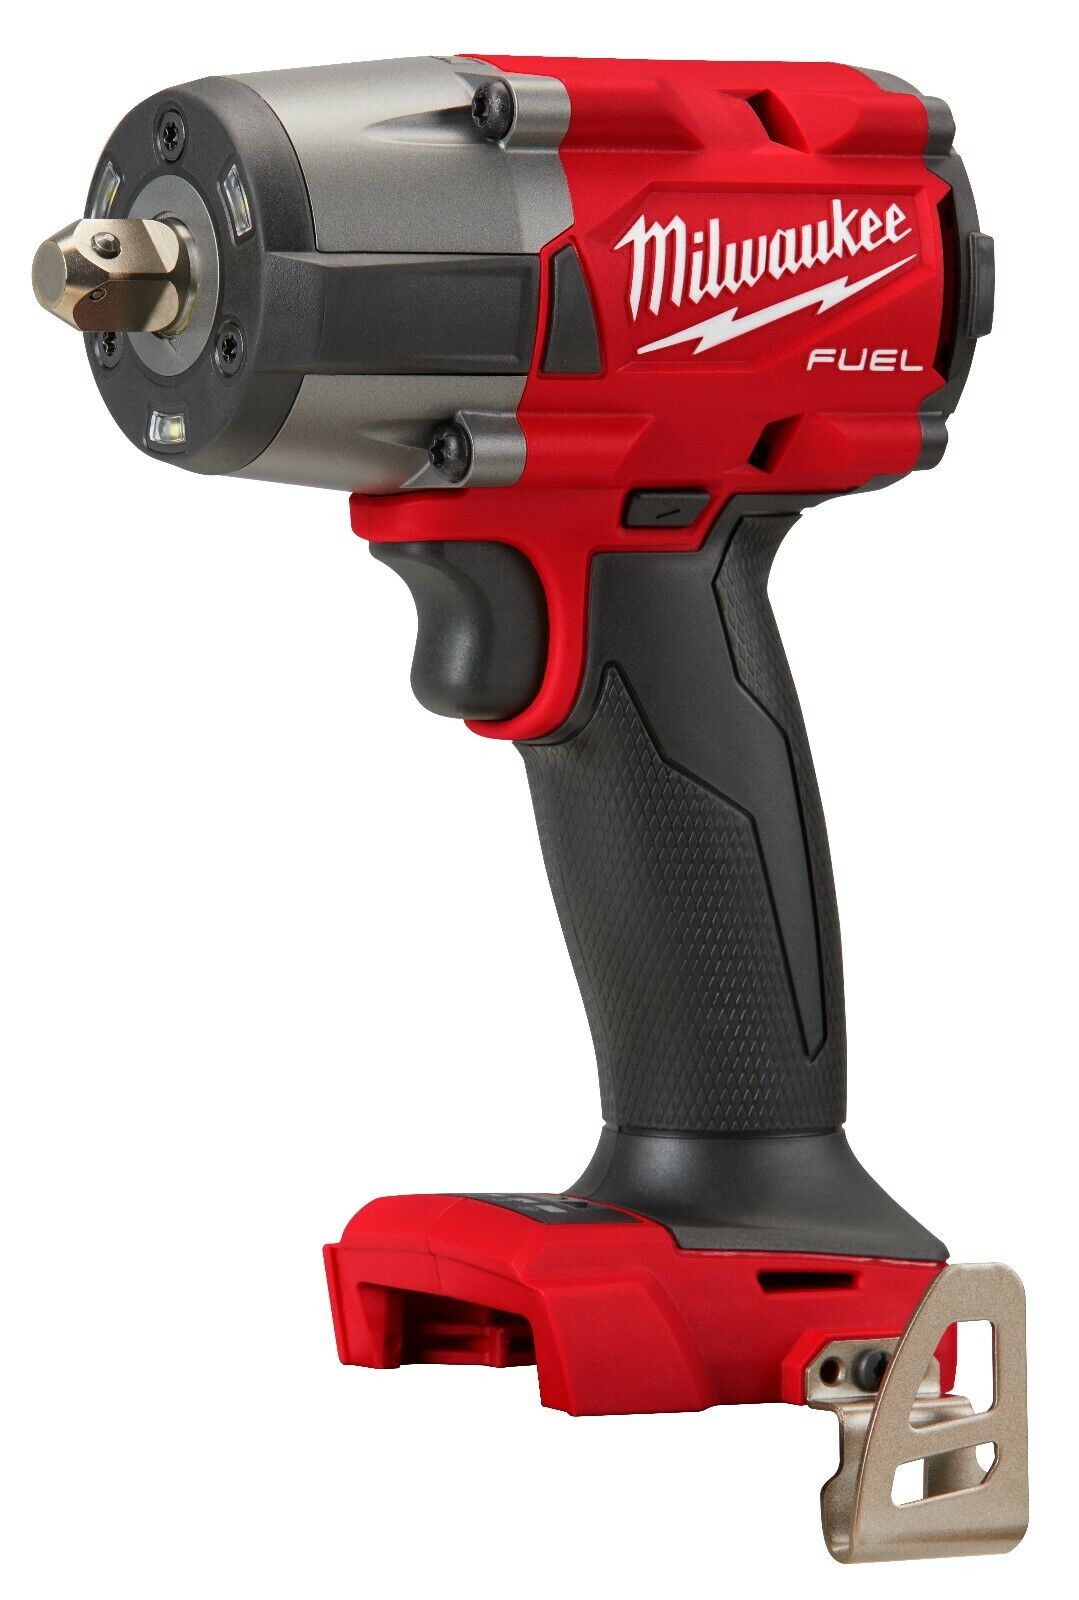 Milwaukee 2962P-20 M18 FUEL Li-Ion BL 1/2 in. Impact Wrench 